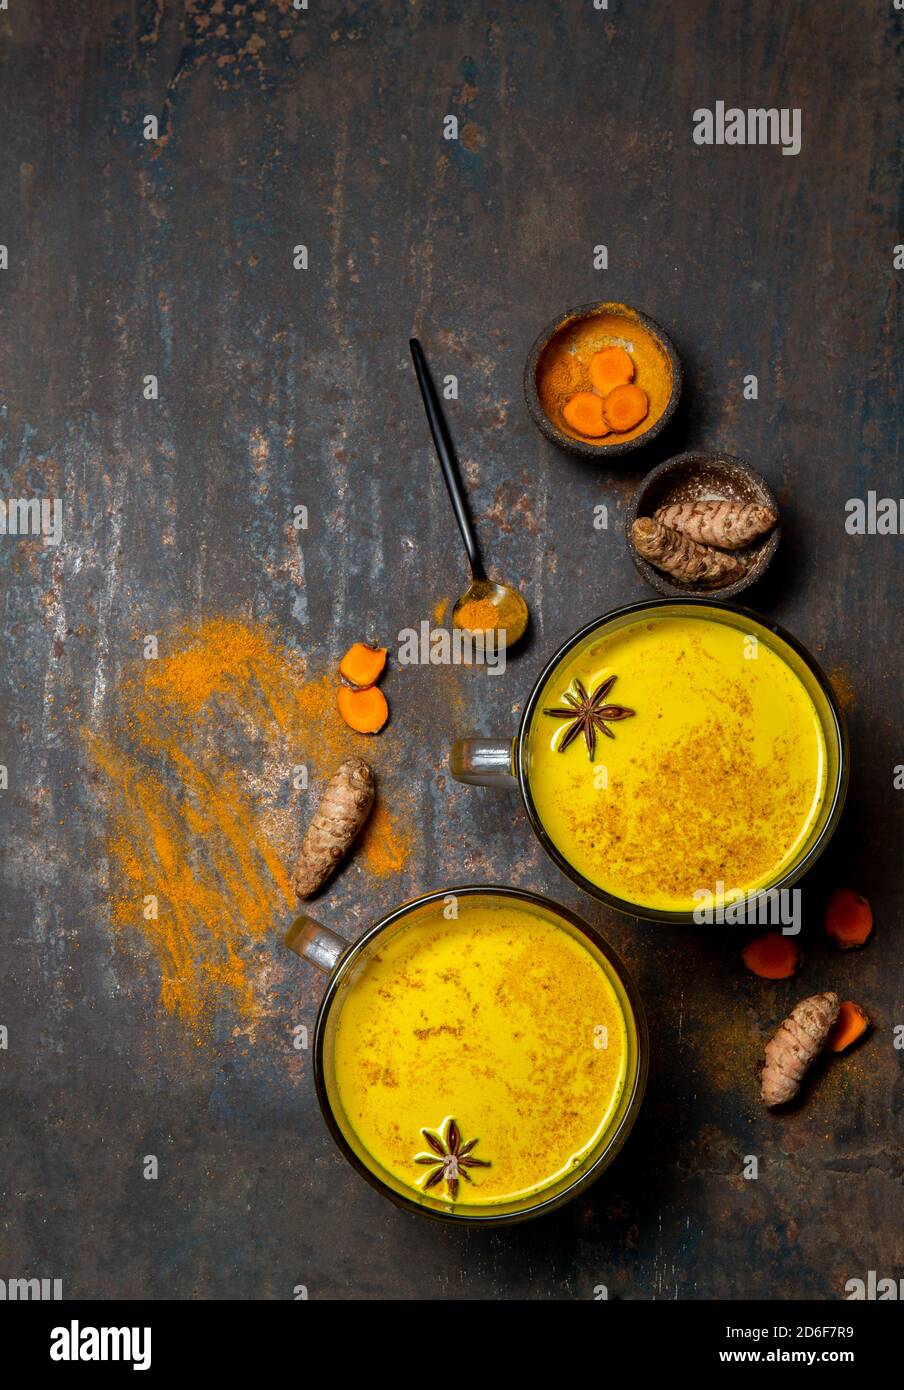 Hot drink golden milk turmeric latte with curcuma powder and spices. Top view Stock Photo